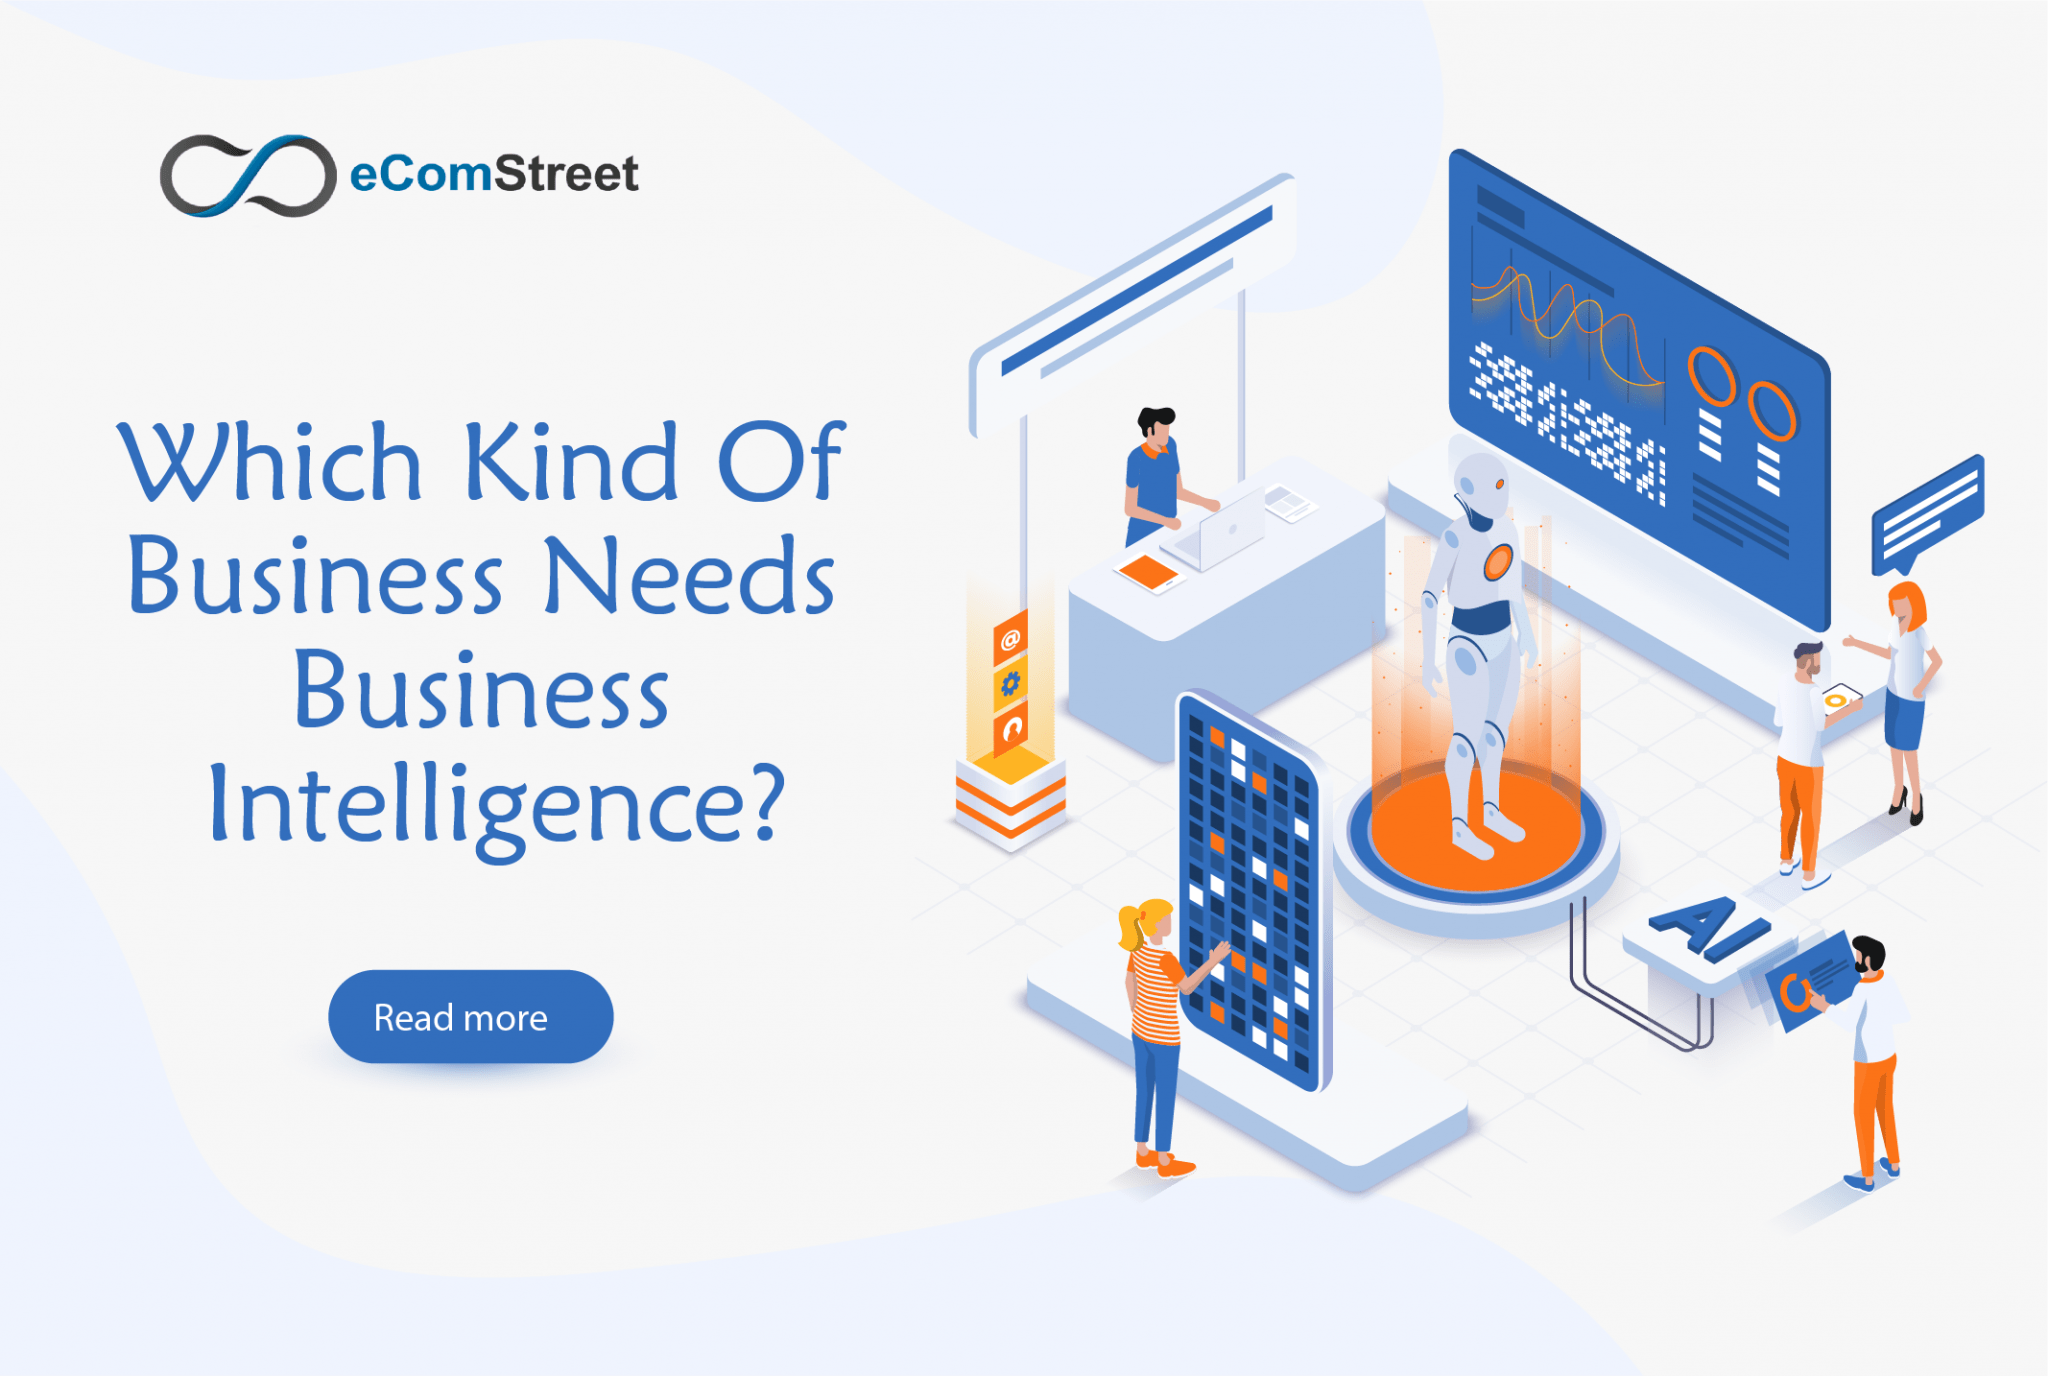 Learn which types of businesses can benefit the most from implementing BI tools and processes. From small startups to large corporations, find out how business intelligence can help you make better decisions, optimize operations, and achieve greater success